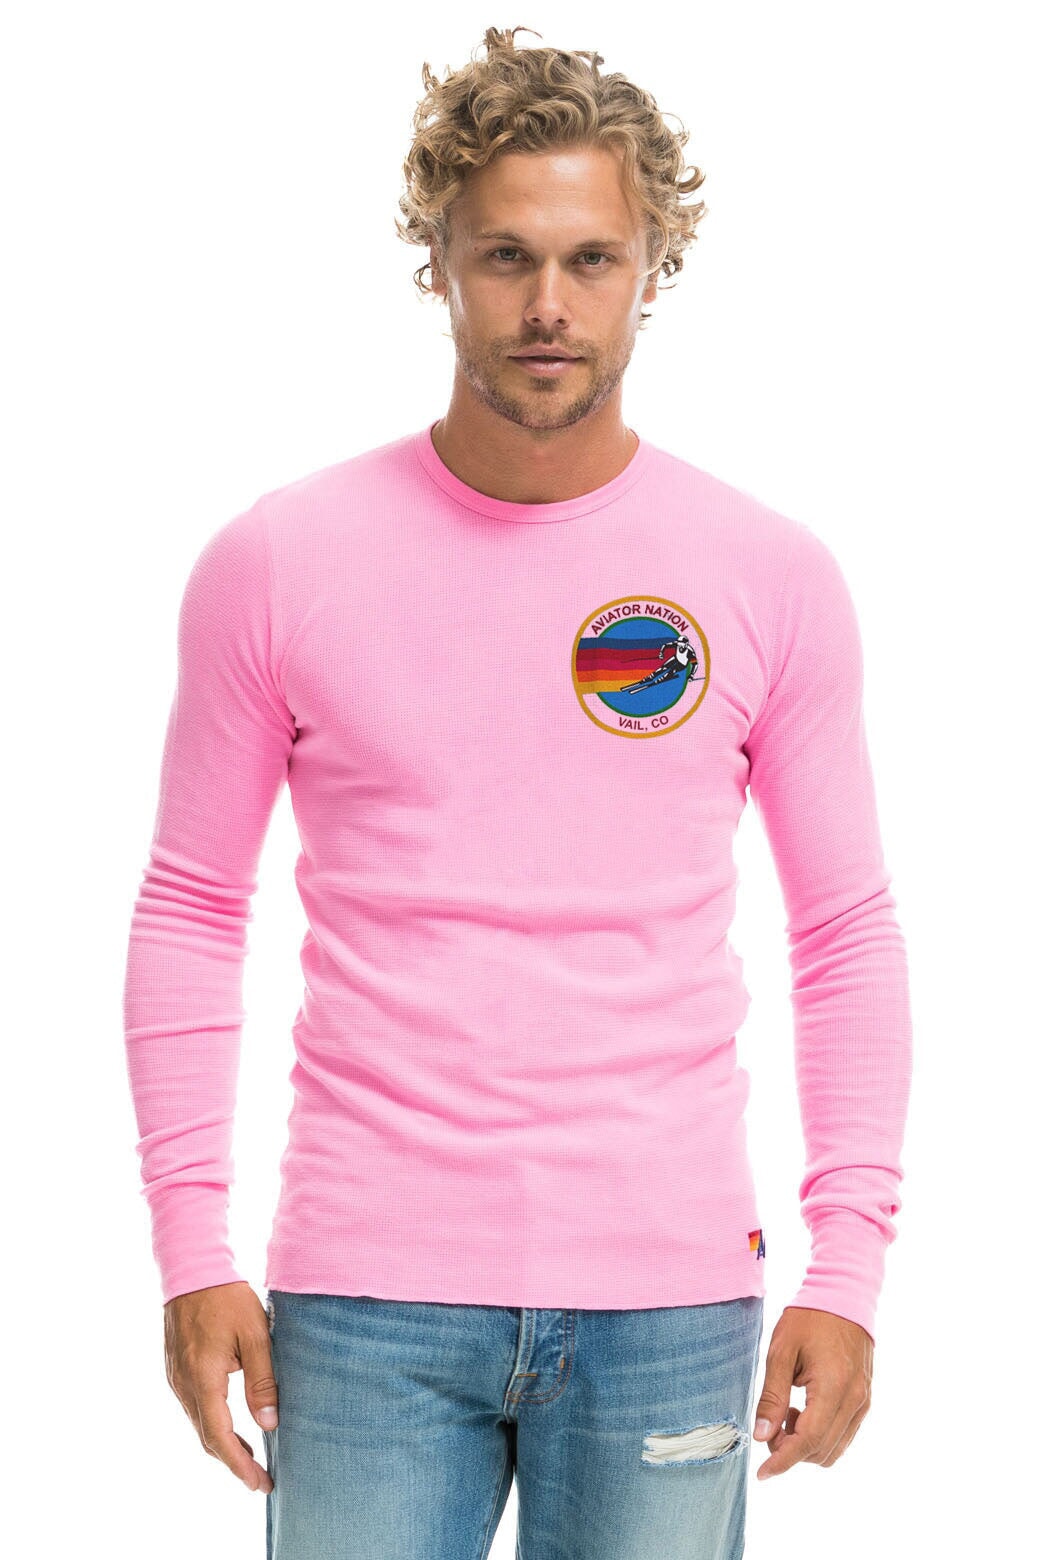 AVIATOR NATION VAIL THERMAL - NEON PINK Thermal Aviator Nation 